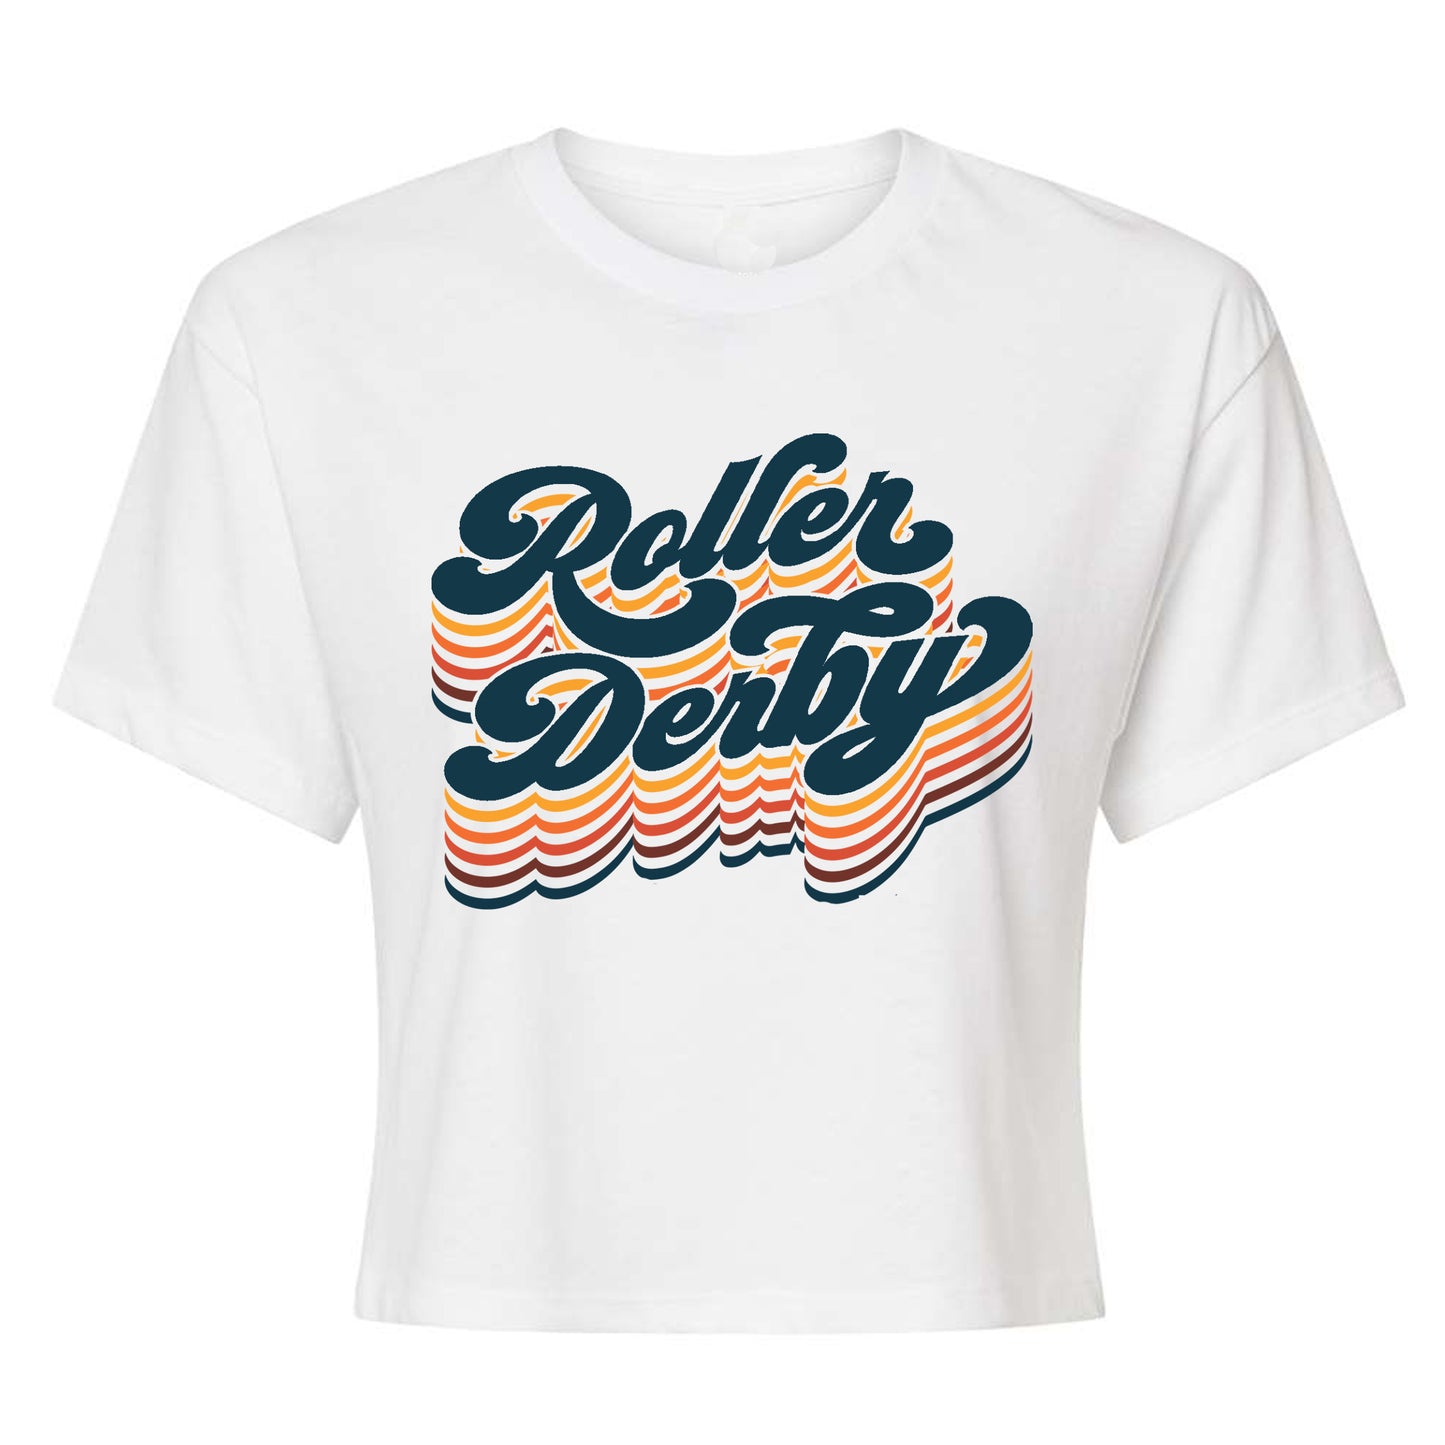 Dropping Vibes Roller Derby Crop Top